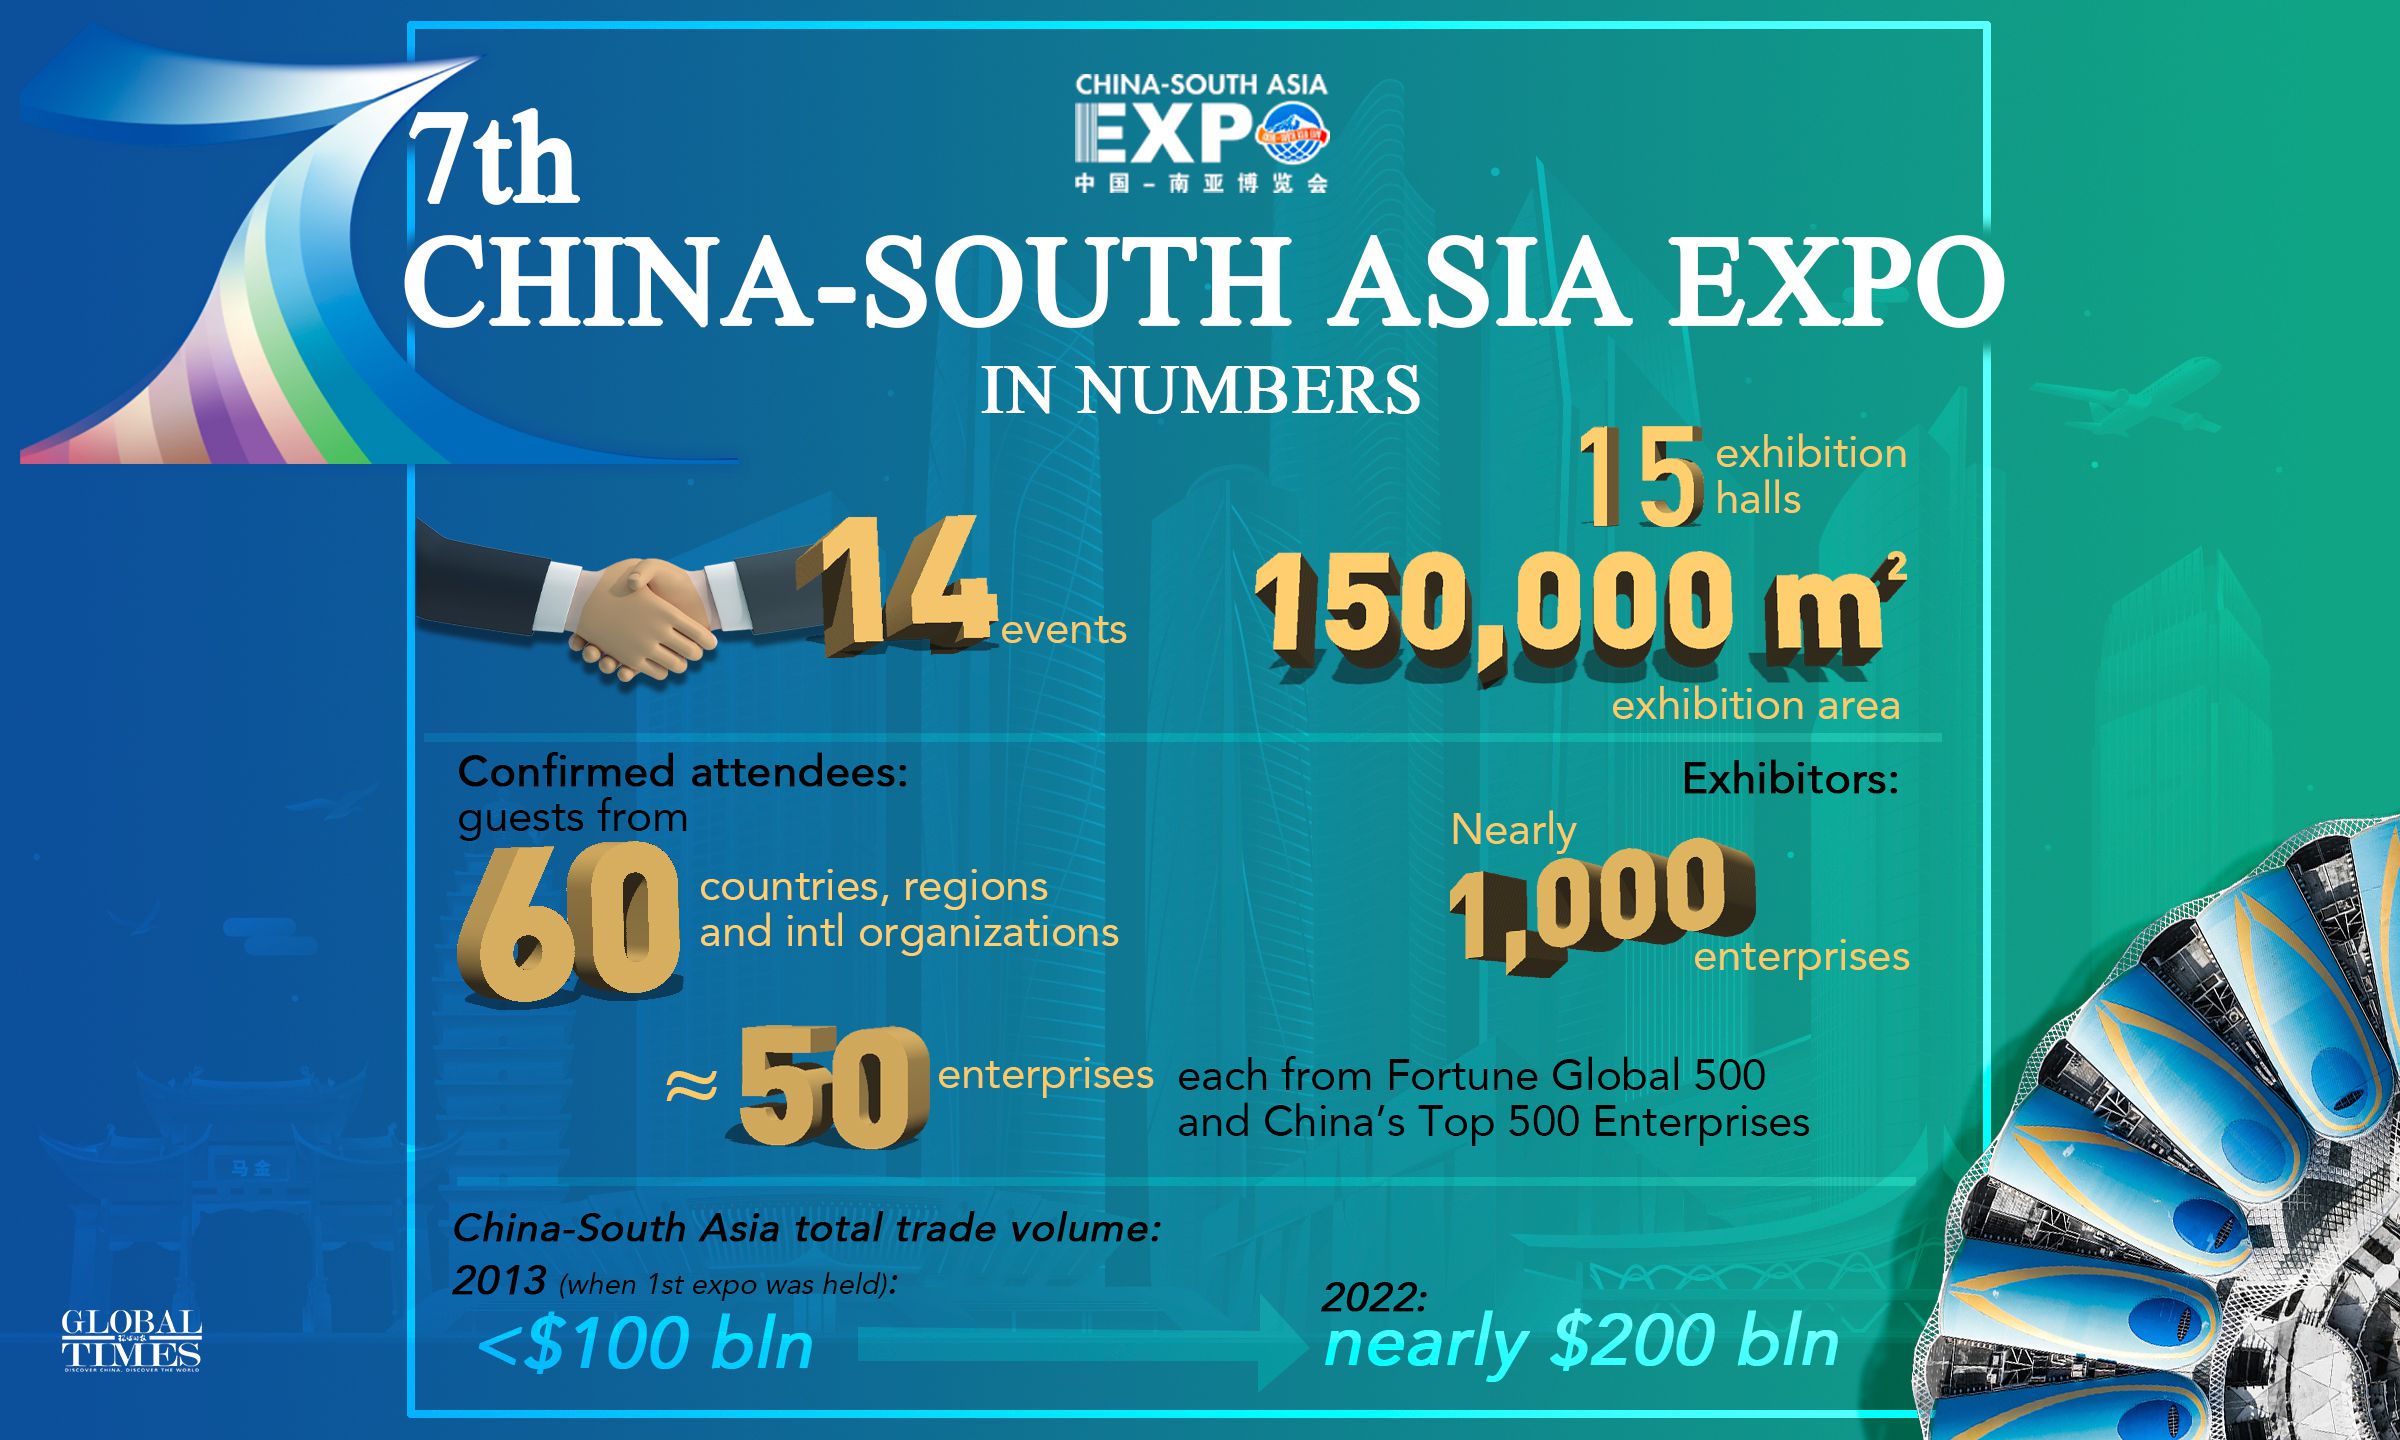 7th China-South Asia Expo in numbers